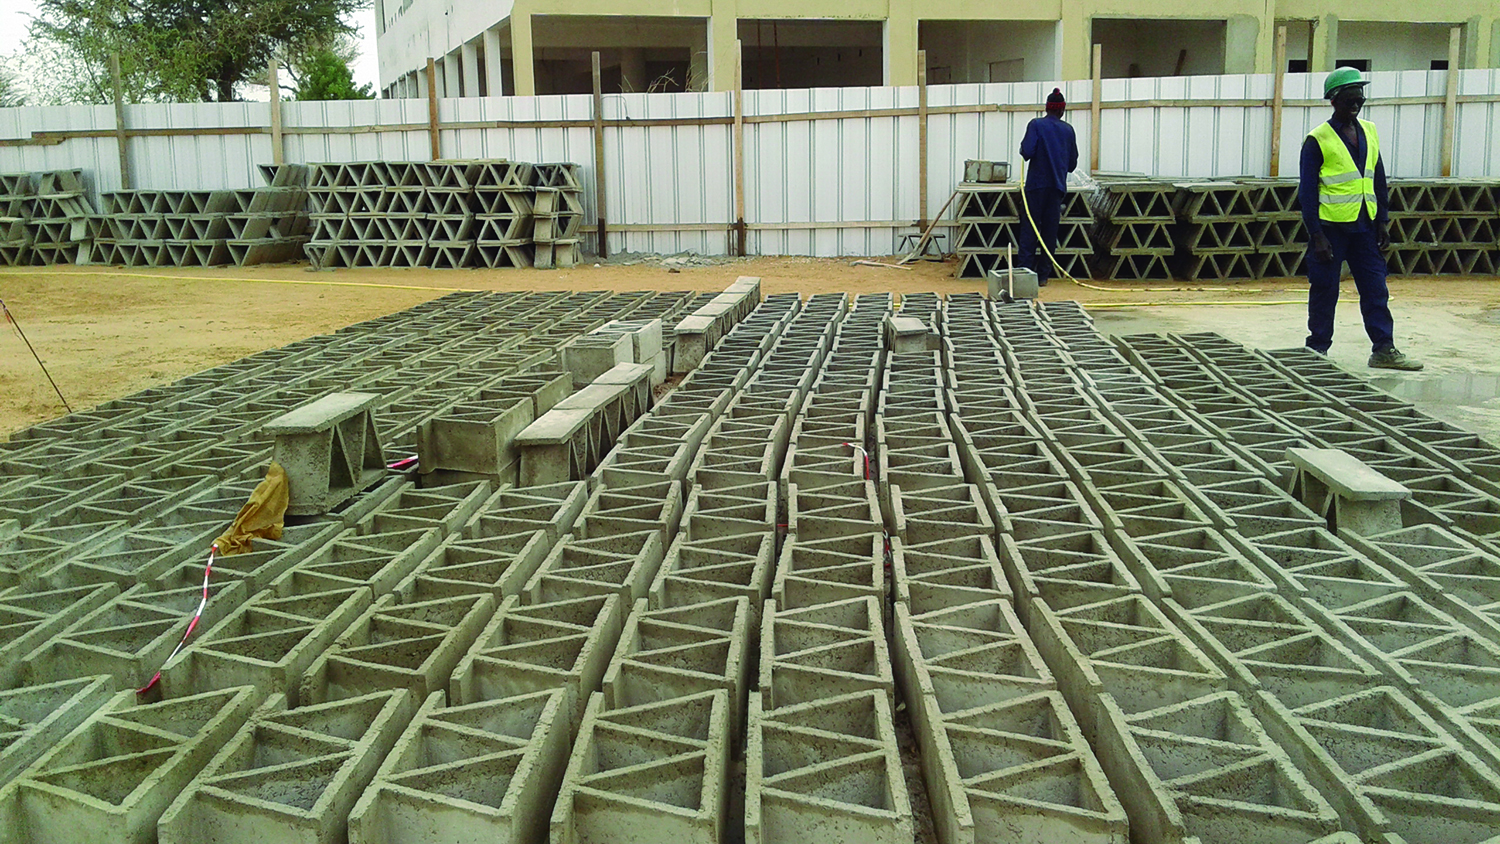 Assembly of the truss